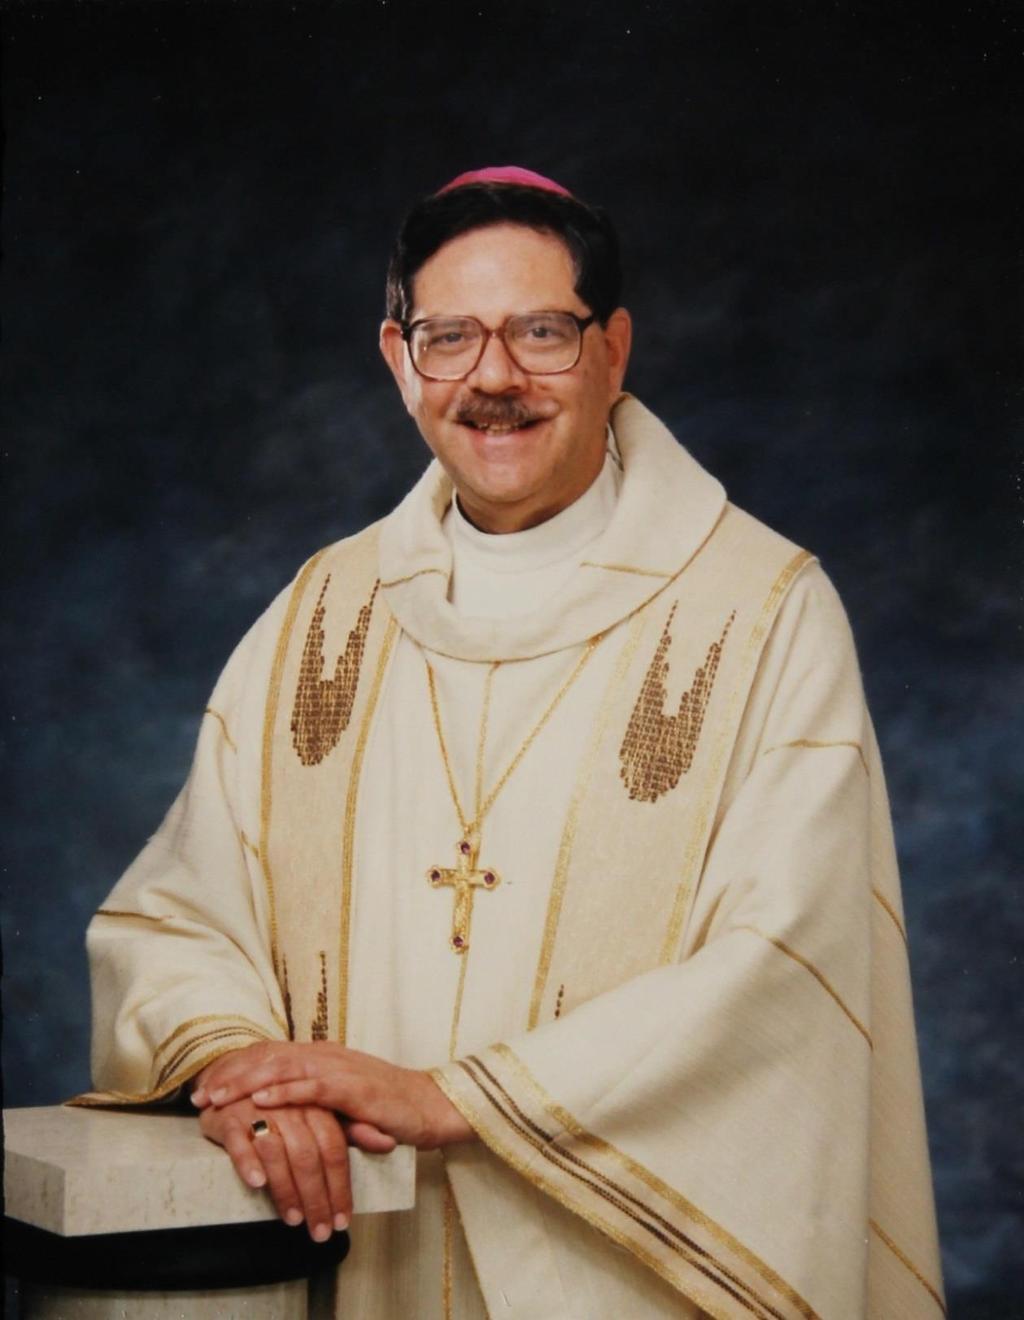 + BISHOP RICHARD JOHN GARCIA Priest for the Archdiocese of